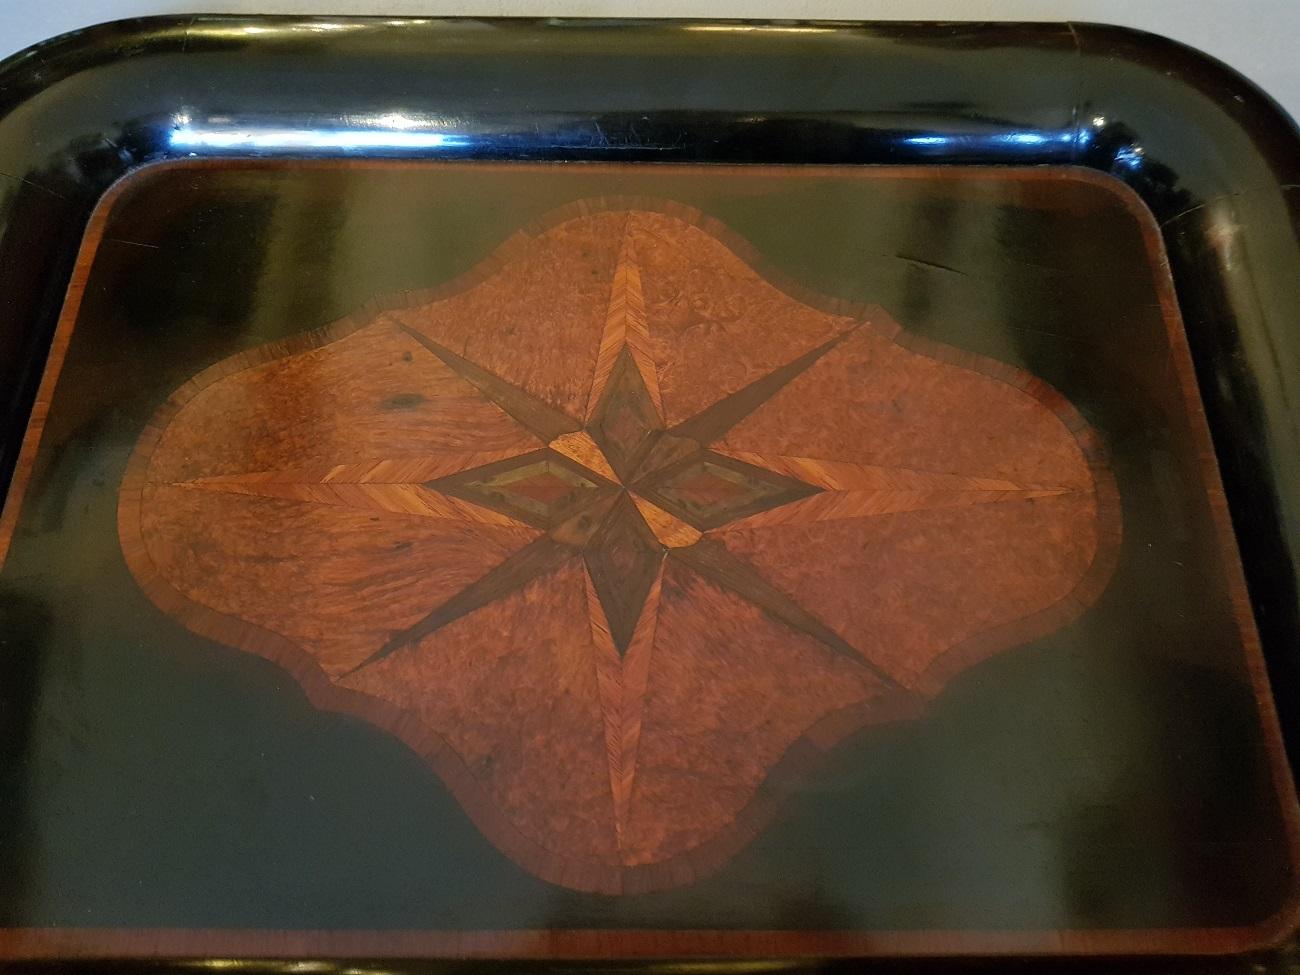 Late 19th century Dutch black polished serving tray inlaid with various woods (wear consistent by age and use).

The measurements are,
Depth 40 cm/ 15.7 inch.
Width 52 cm/ 20.4 inch.
Height 3.5 cm/ 1.3 inch.